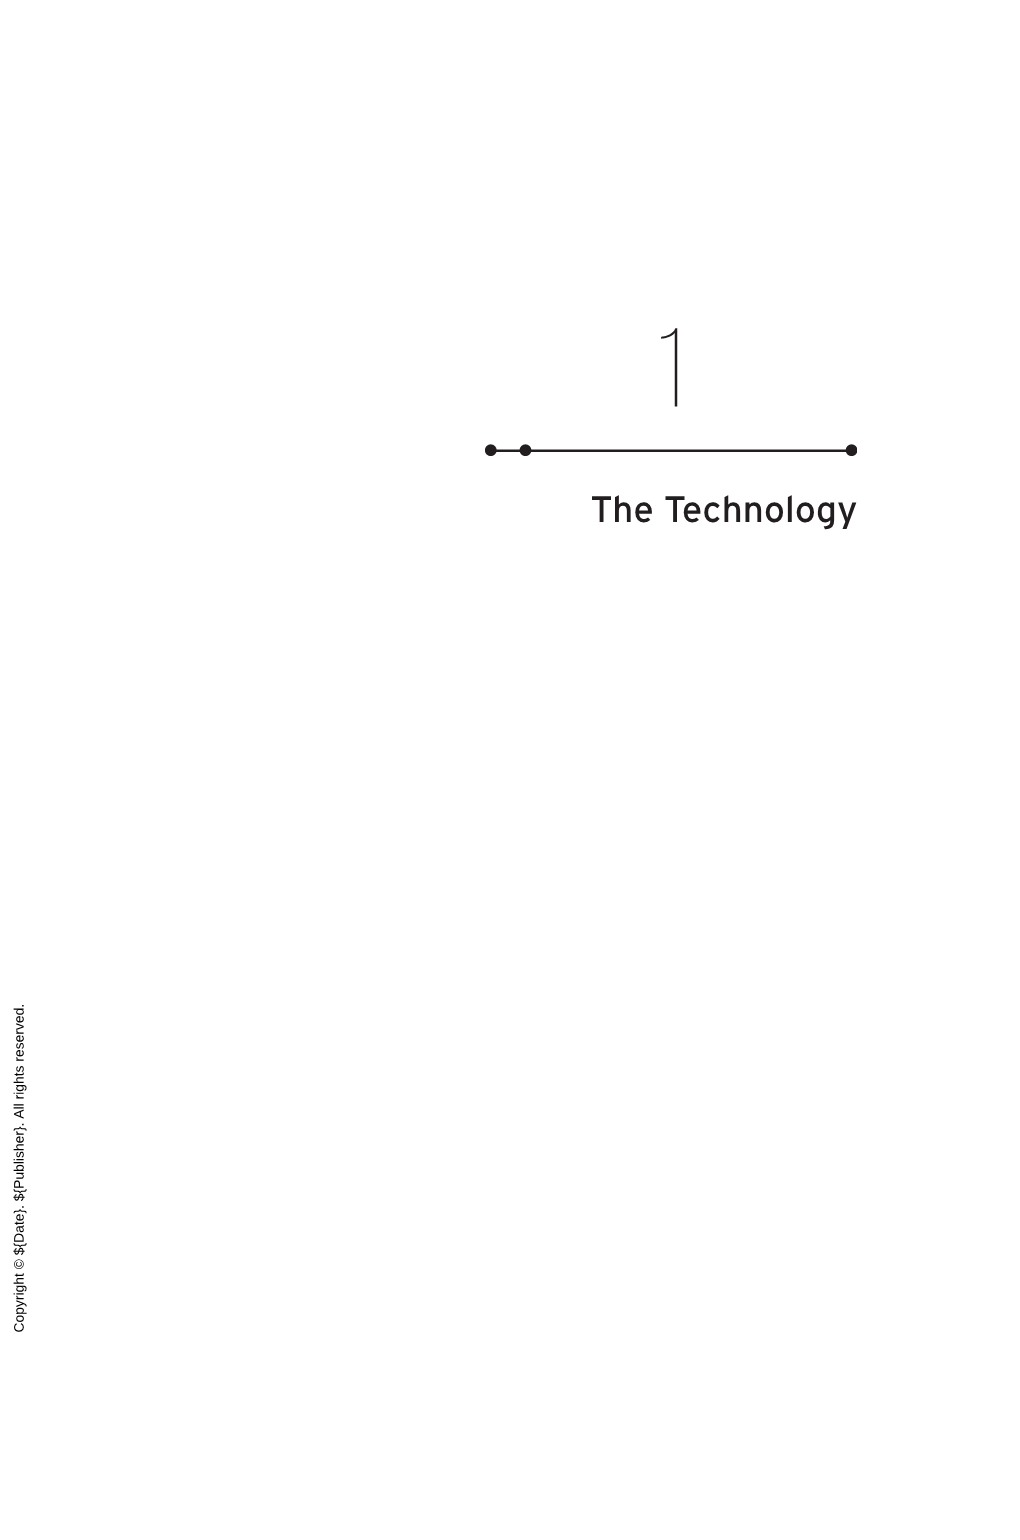 The Technology Copyright © ${Date}